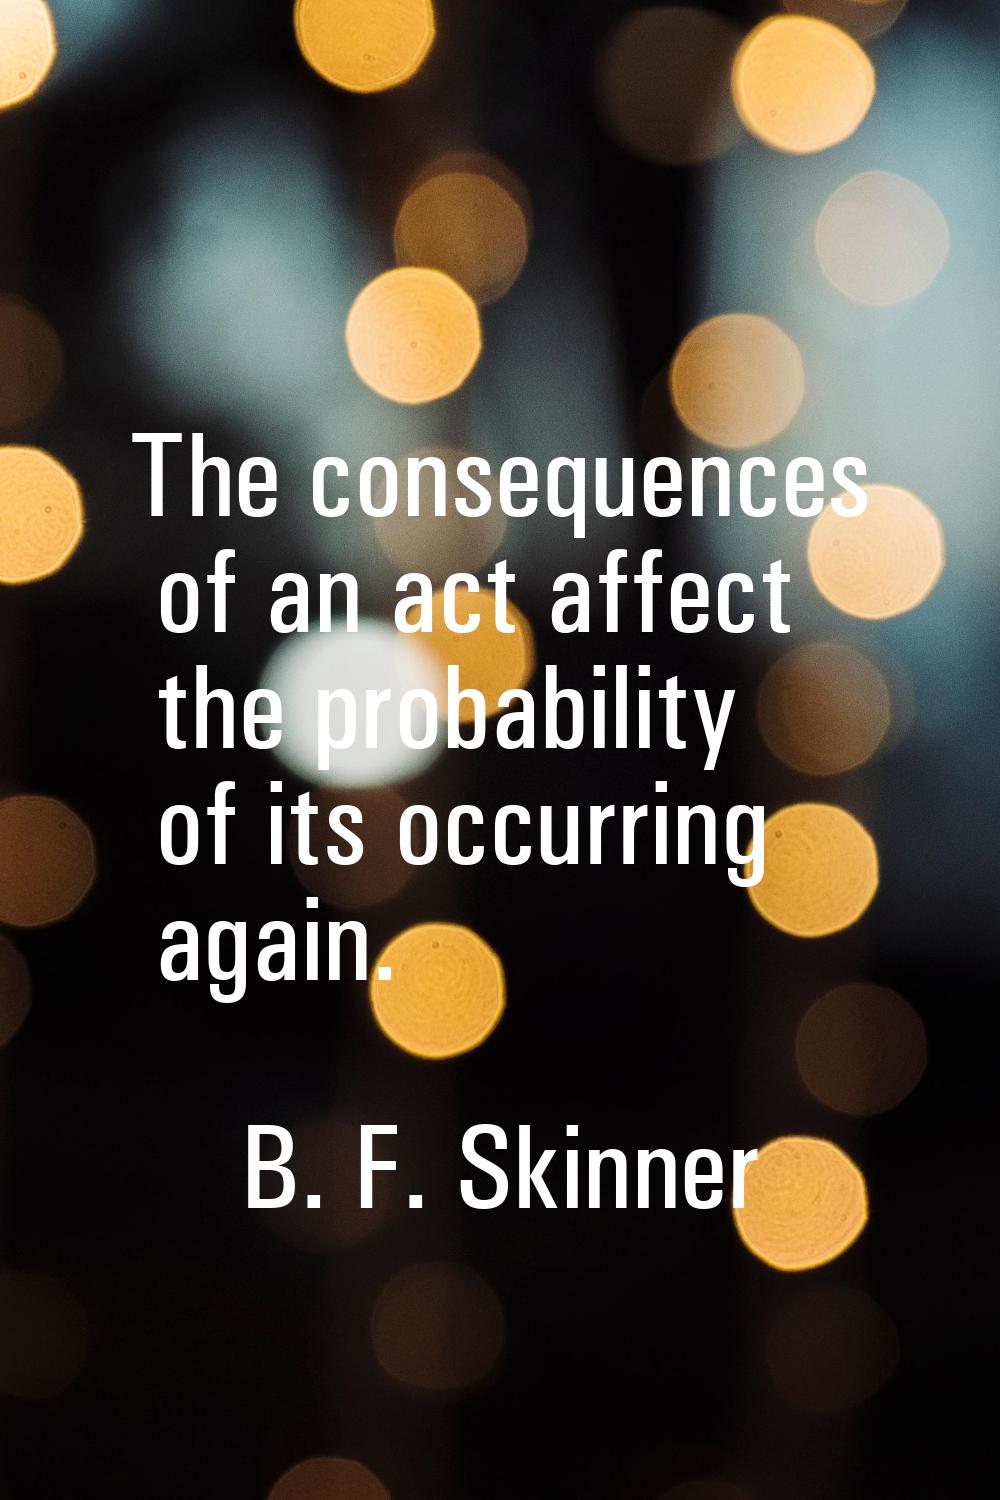 The consequences of an act affect the probability of its occurring again.